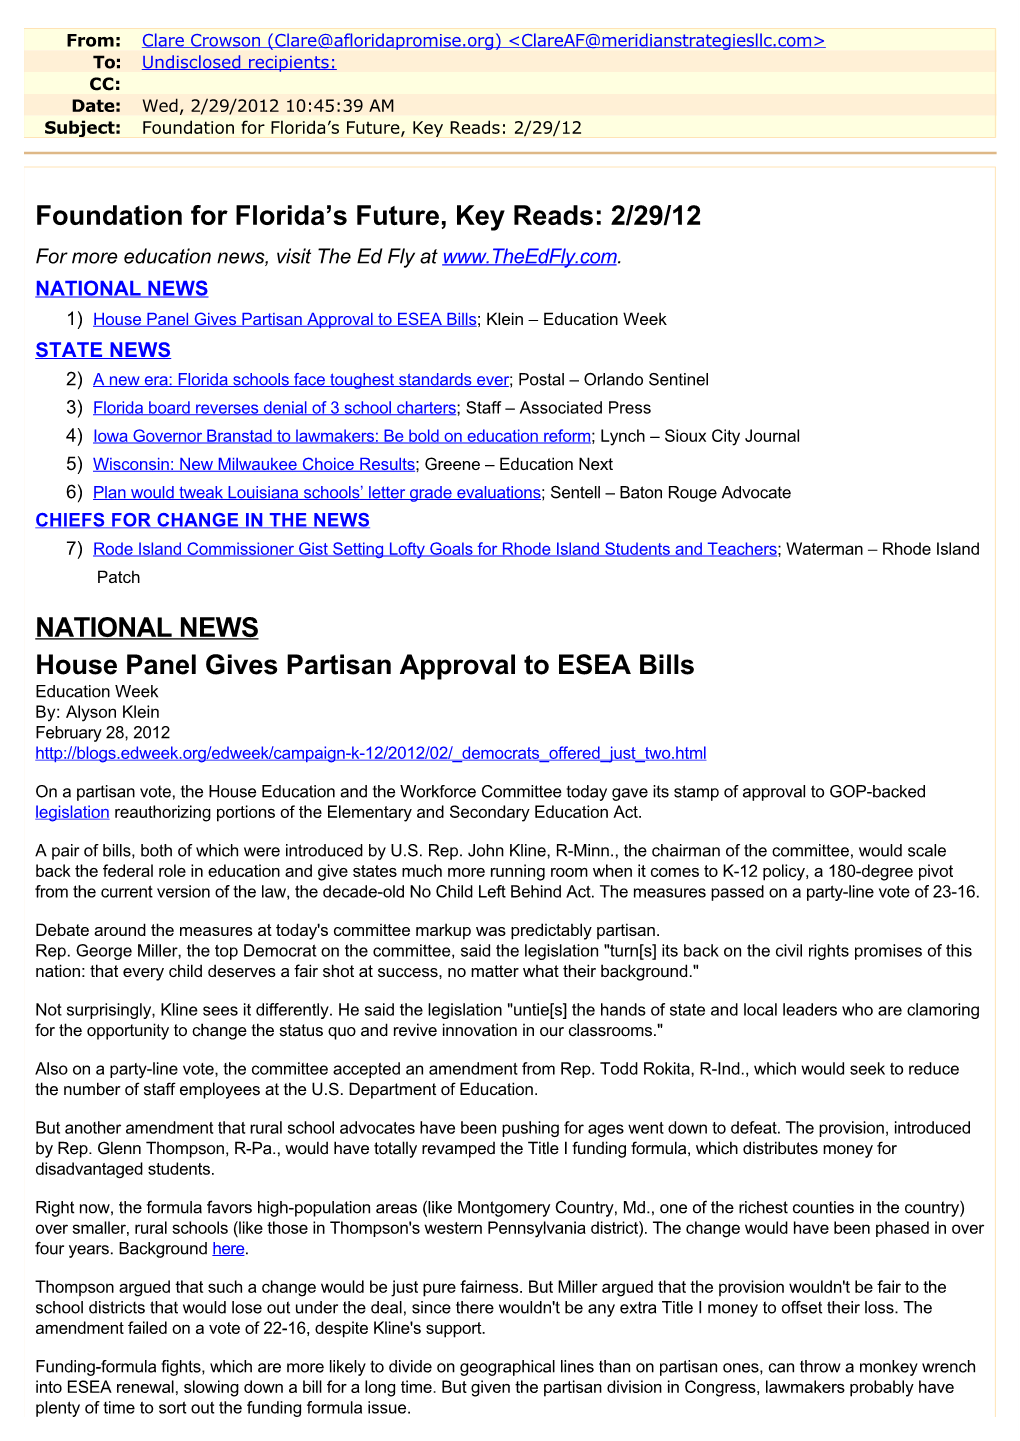 2/29/12 NATIONAL NEWS House Panel Gives Partisan Approval To